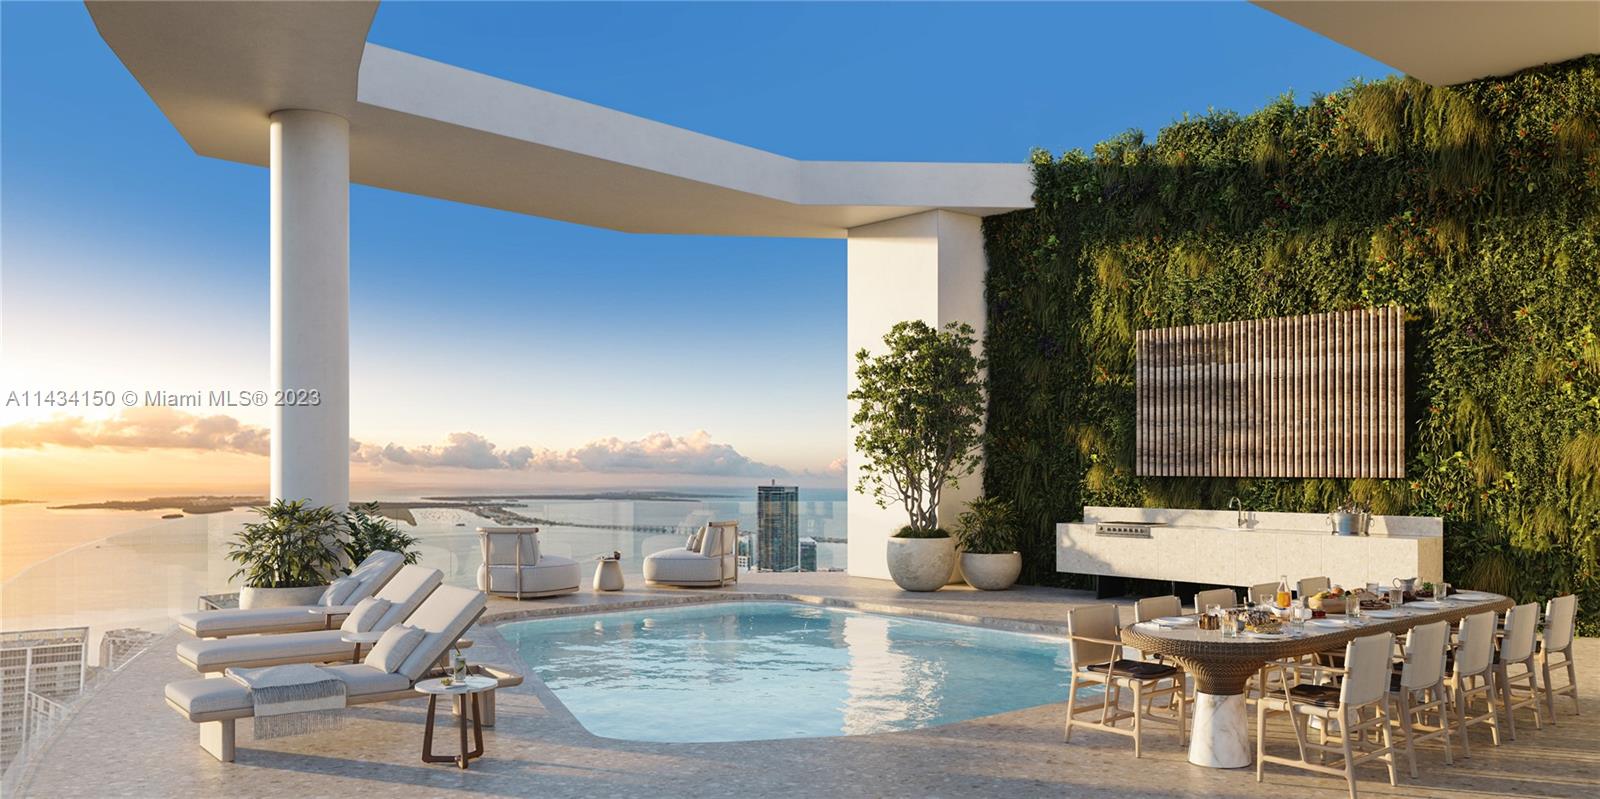 Elevate your living experience in this extraordinary 2-level PH at Baccarat Residences Miami. Overlooking Biscayne Bay, this lavish residence boasts 3 bedrooms, 7.5 baths + Den, maids’ room, and an expansive terrace with a private pool and summer kitchen. With 11-foot ceilings, a private elevator, and meticulous finishes throughout, this is the epitome of luxury living. Indulge in panoramic views and unparalleled amenities. Enjoy an infinity pool, wine cellar, marina, gym, and spa. Benefit from dedicated concierge, 24/7 room service, and access to 1Hotel Beach Club.Contact us for an exclusive tour of this exceptional offering.